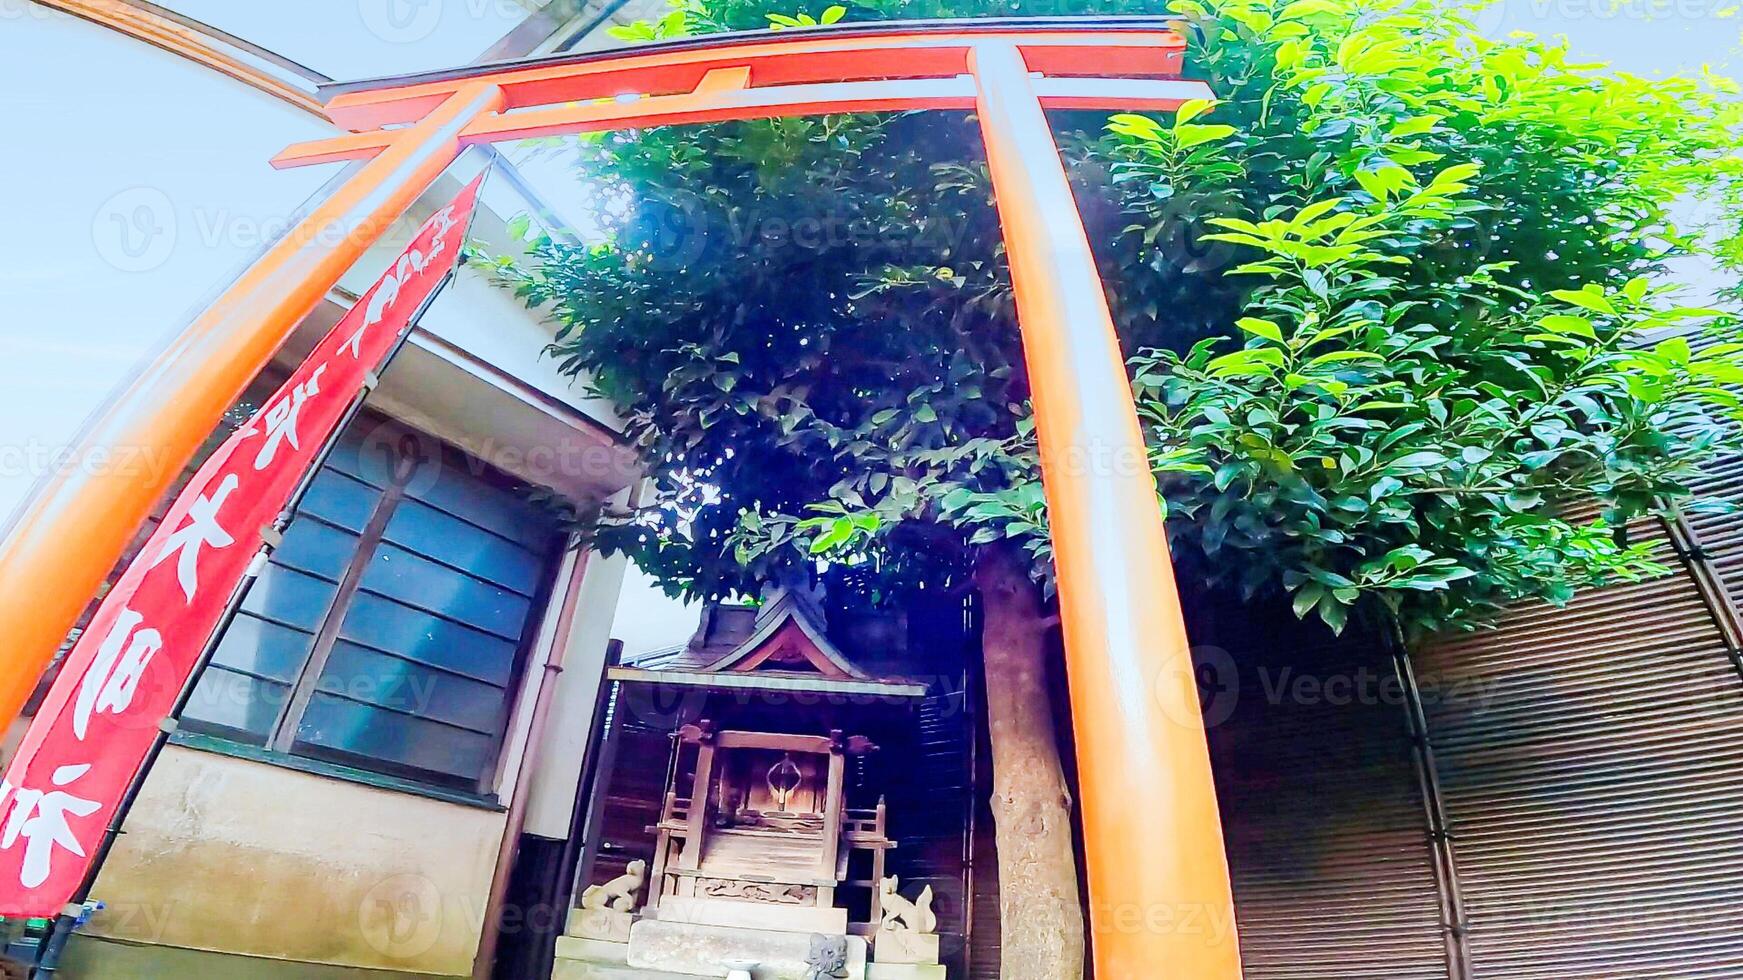 A temple in a hidden location. A temple in Hatsudai, Shibuya Ward, Tokyo, Japan. This is a separate temple of Rurizan Yakuoin Ioji Temple photo